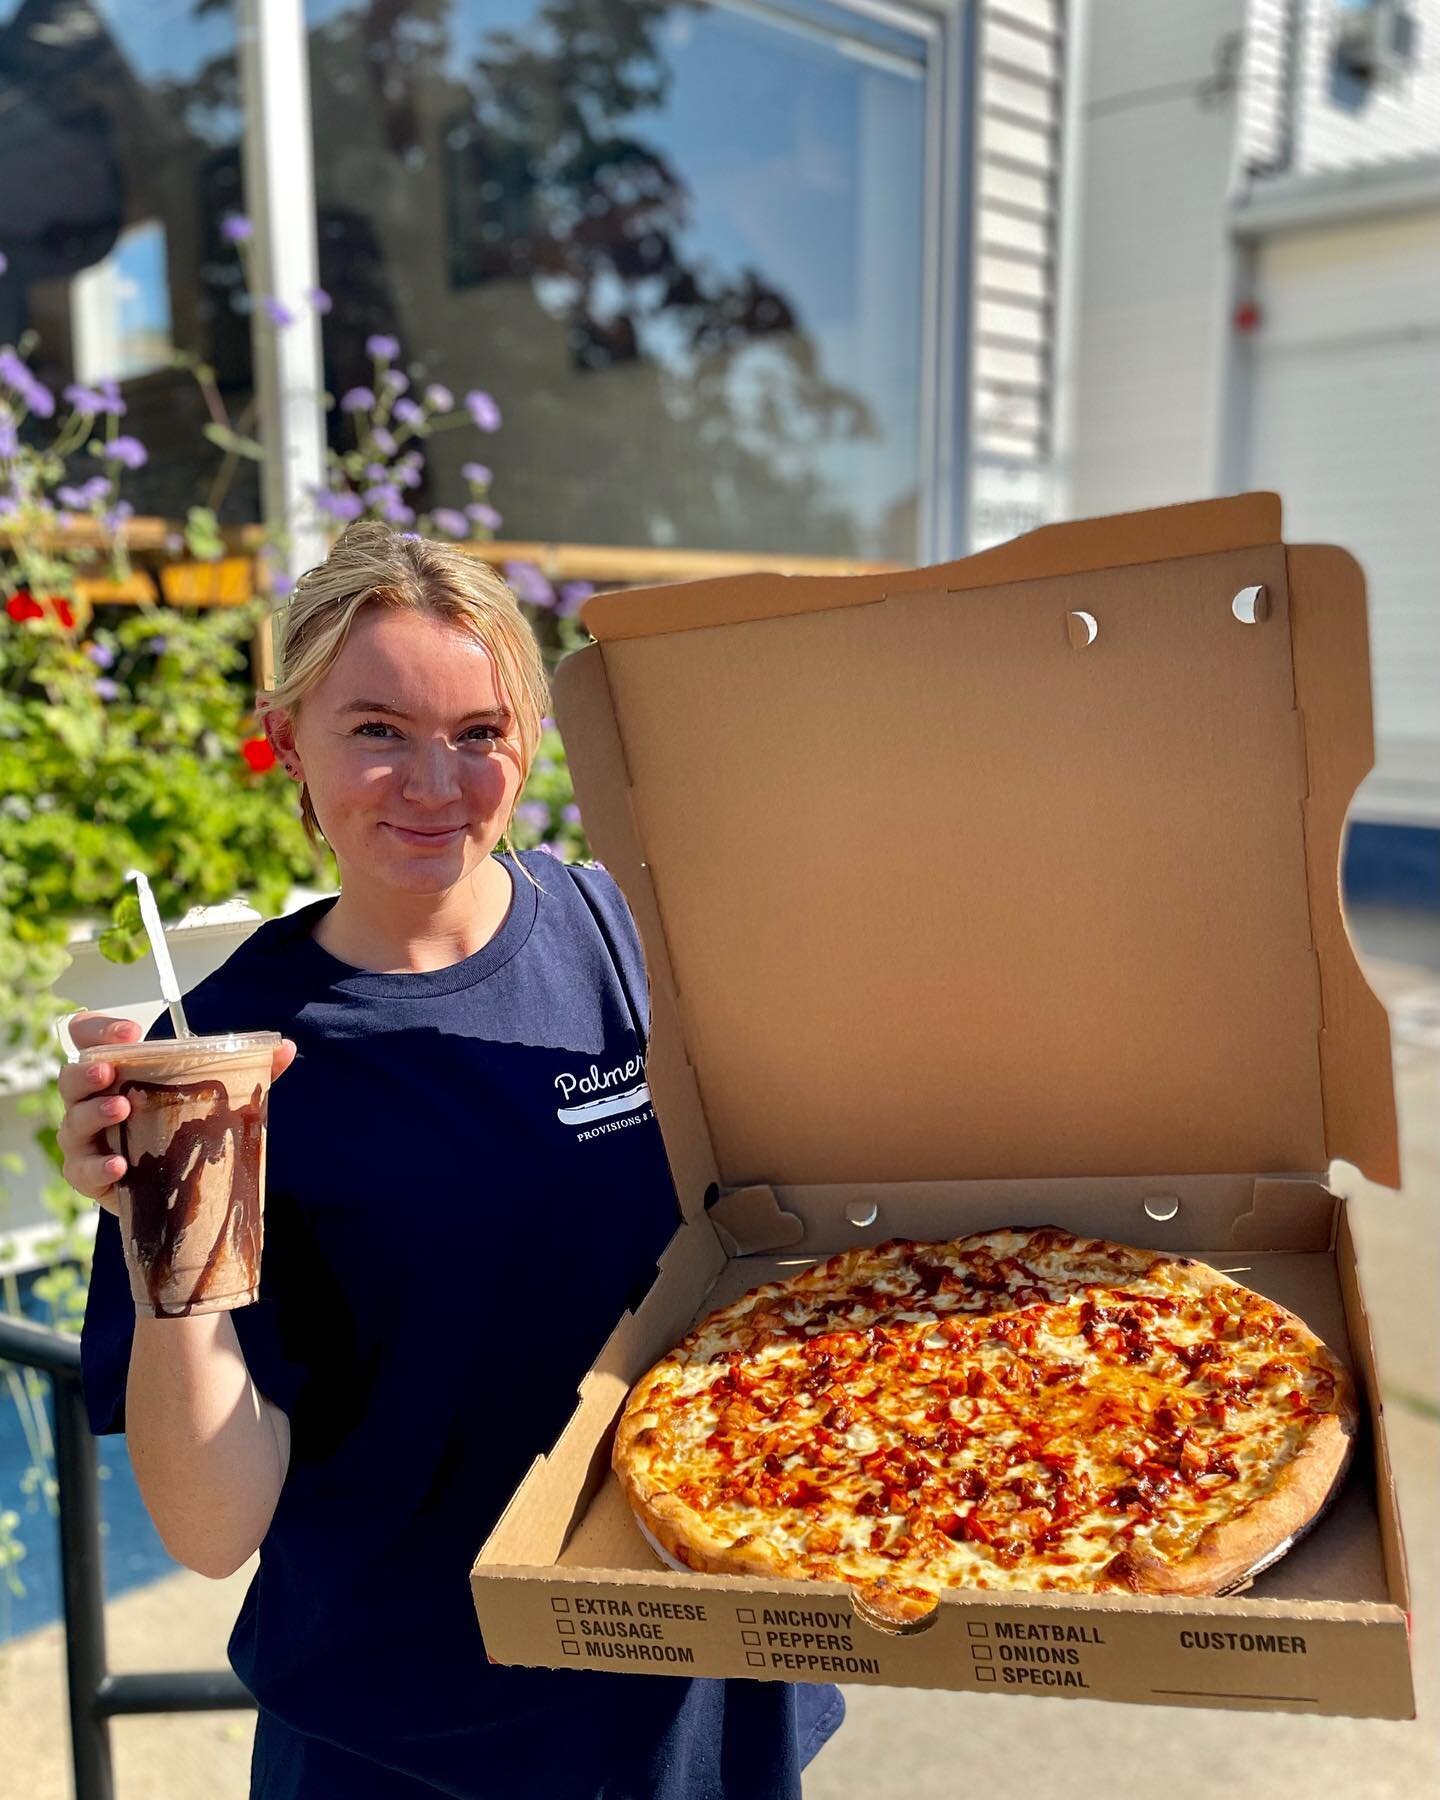 Palmer&rsquo;s pizza paired with a @carsonsstore milkshake 😍 Here we have the BBQ Chicken pizza and a classic chocolate milkshake. It really doesn&rsquo;t get better than this!! 
.
.
.
.
.
⠀⠀⠀⠀⠀⠀⠀⠀⠀
#noank #noankct #local #shopct #shoplocal #newengl